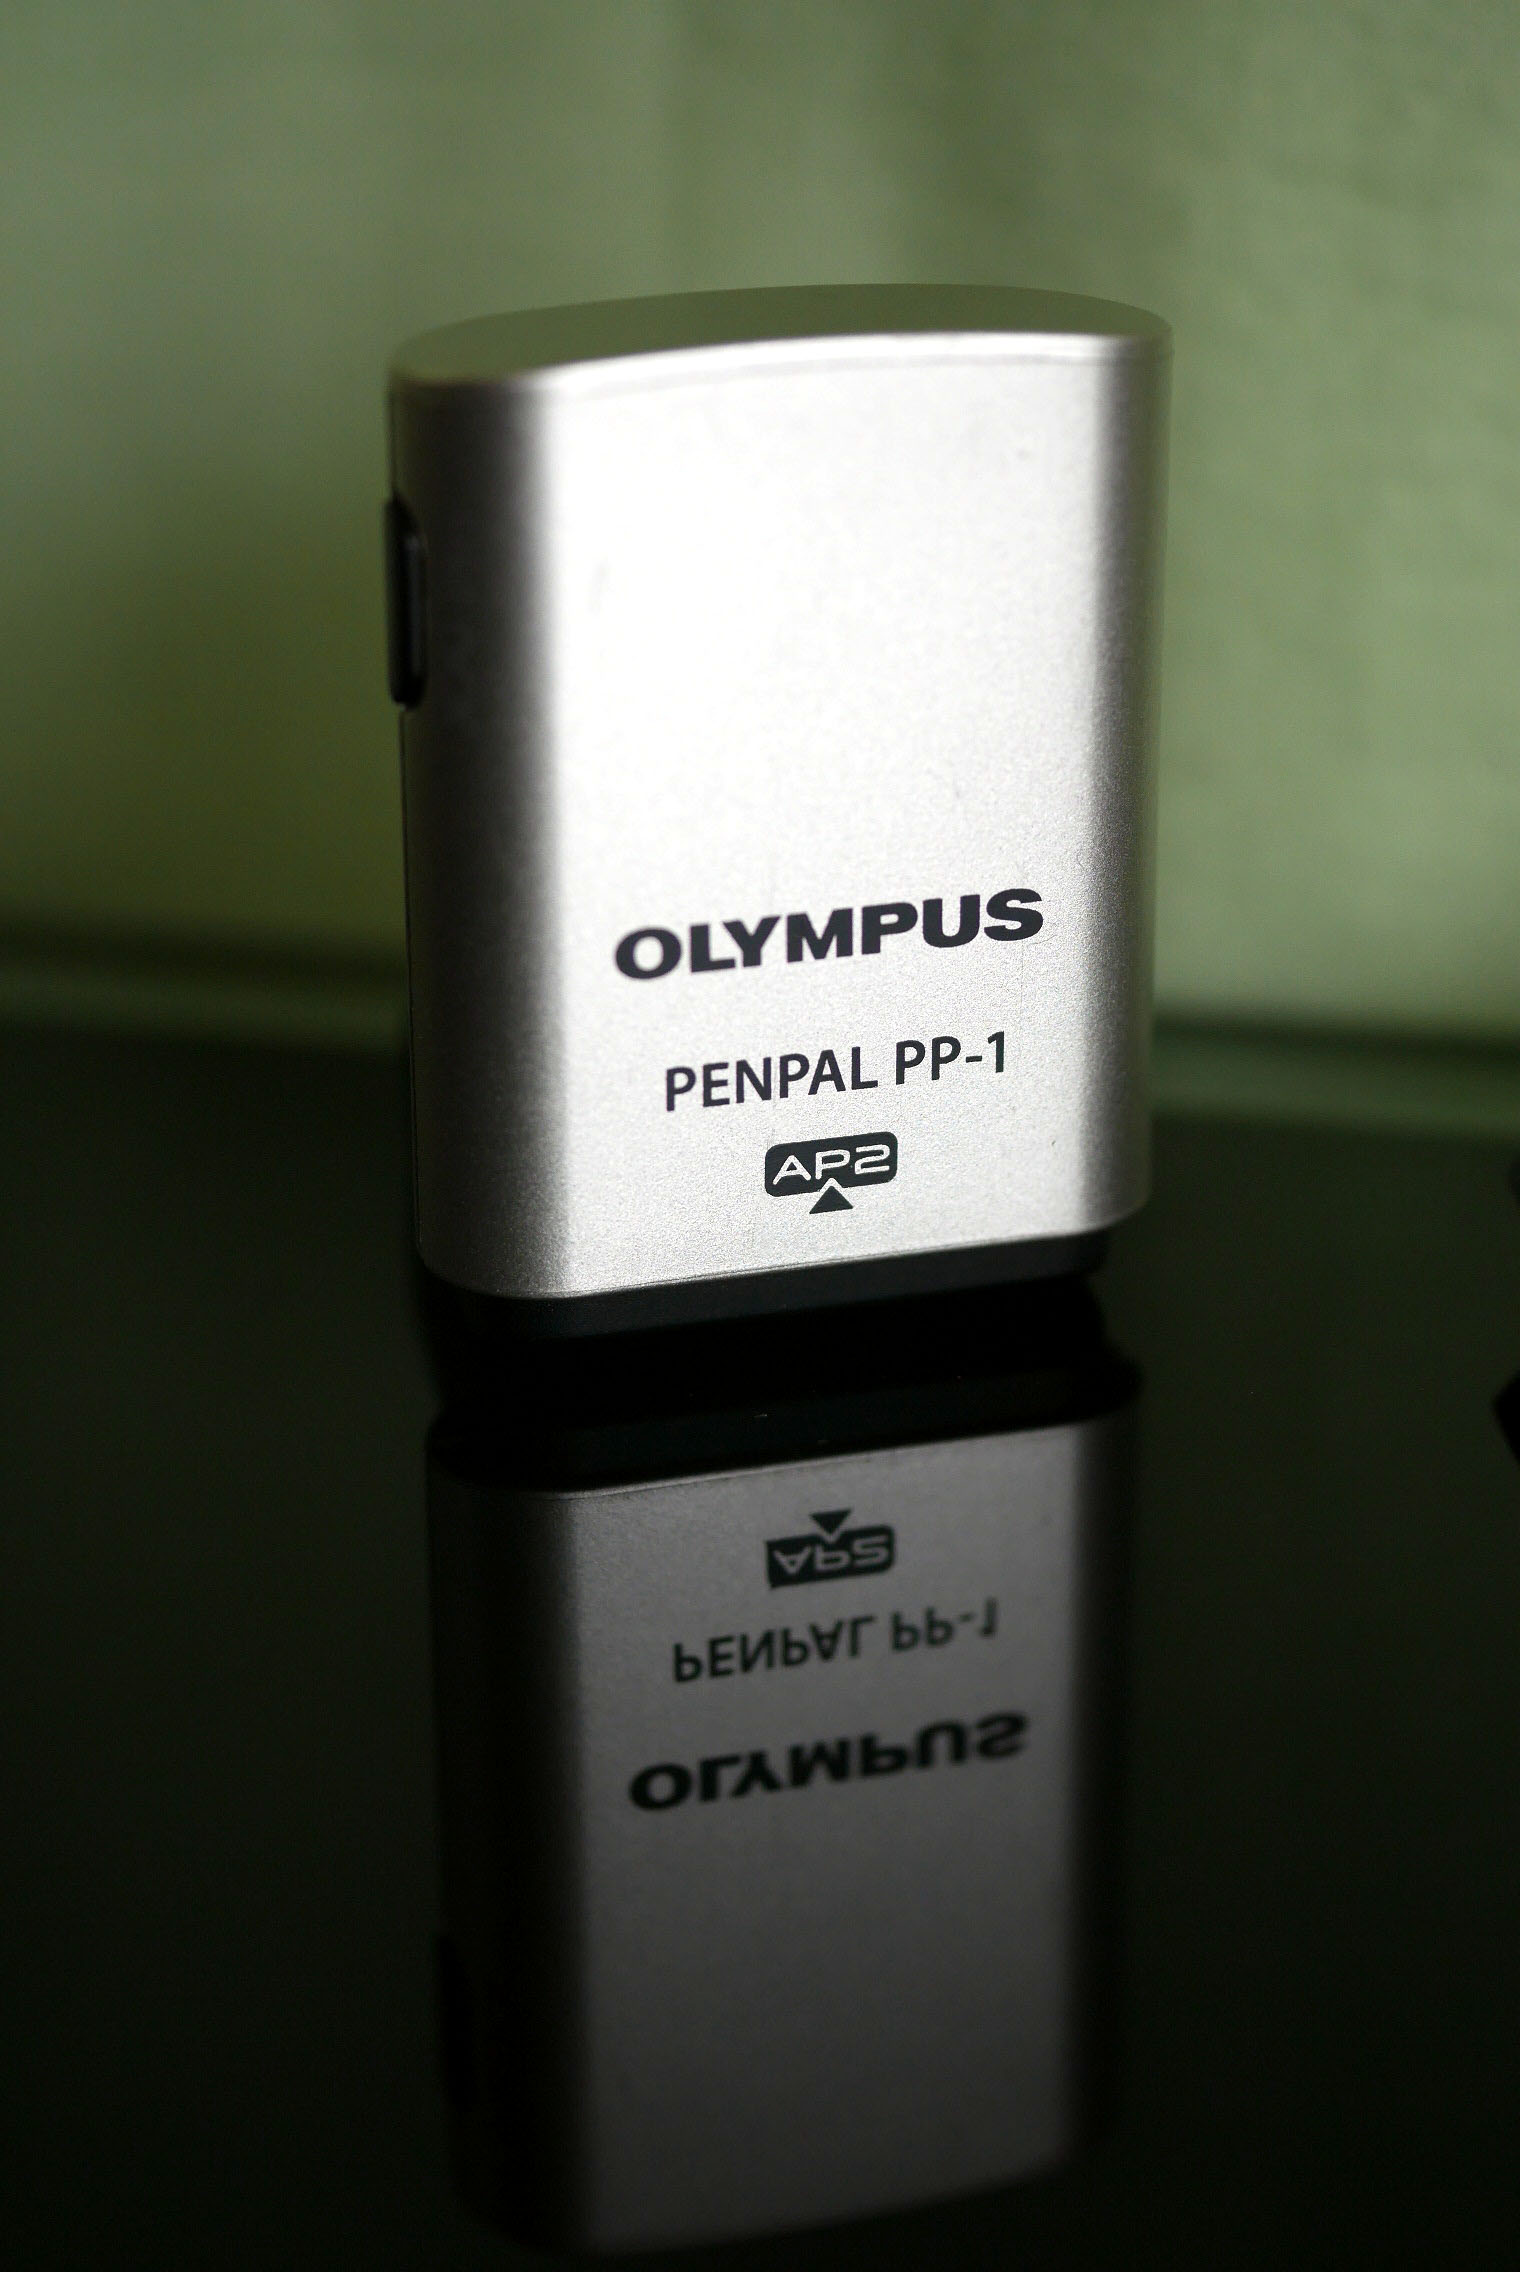 OLYMPUS PENPAL PP-1 Shoe Mount Bluetooth Transmitter for Olympus PEN Compact System Cameras in pouch